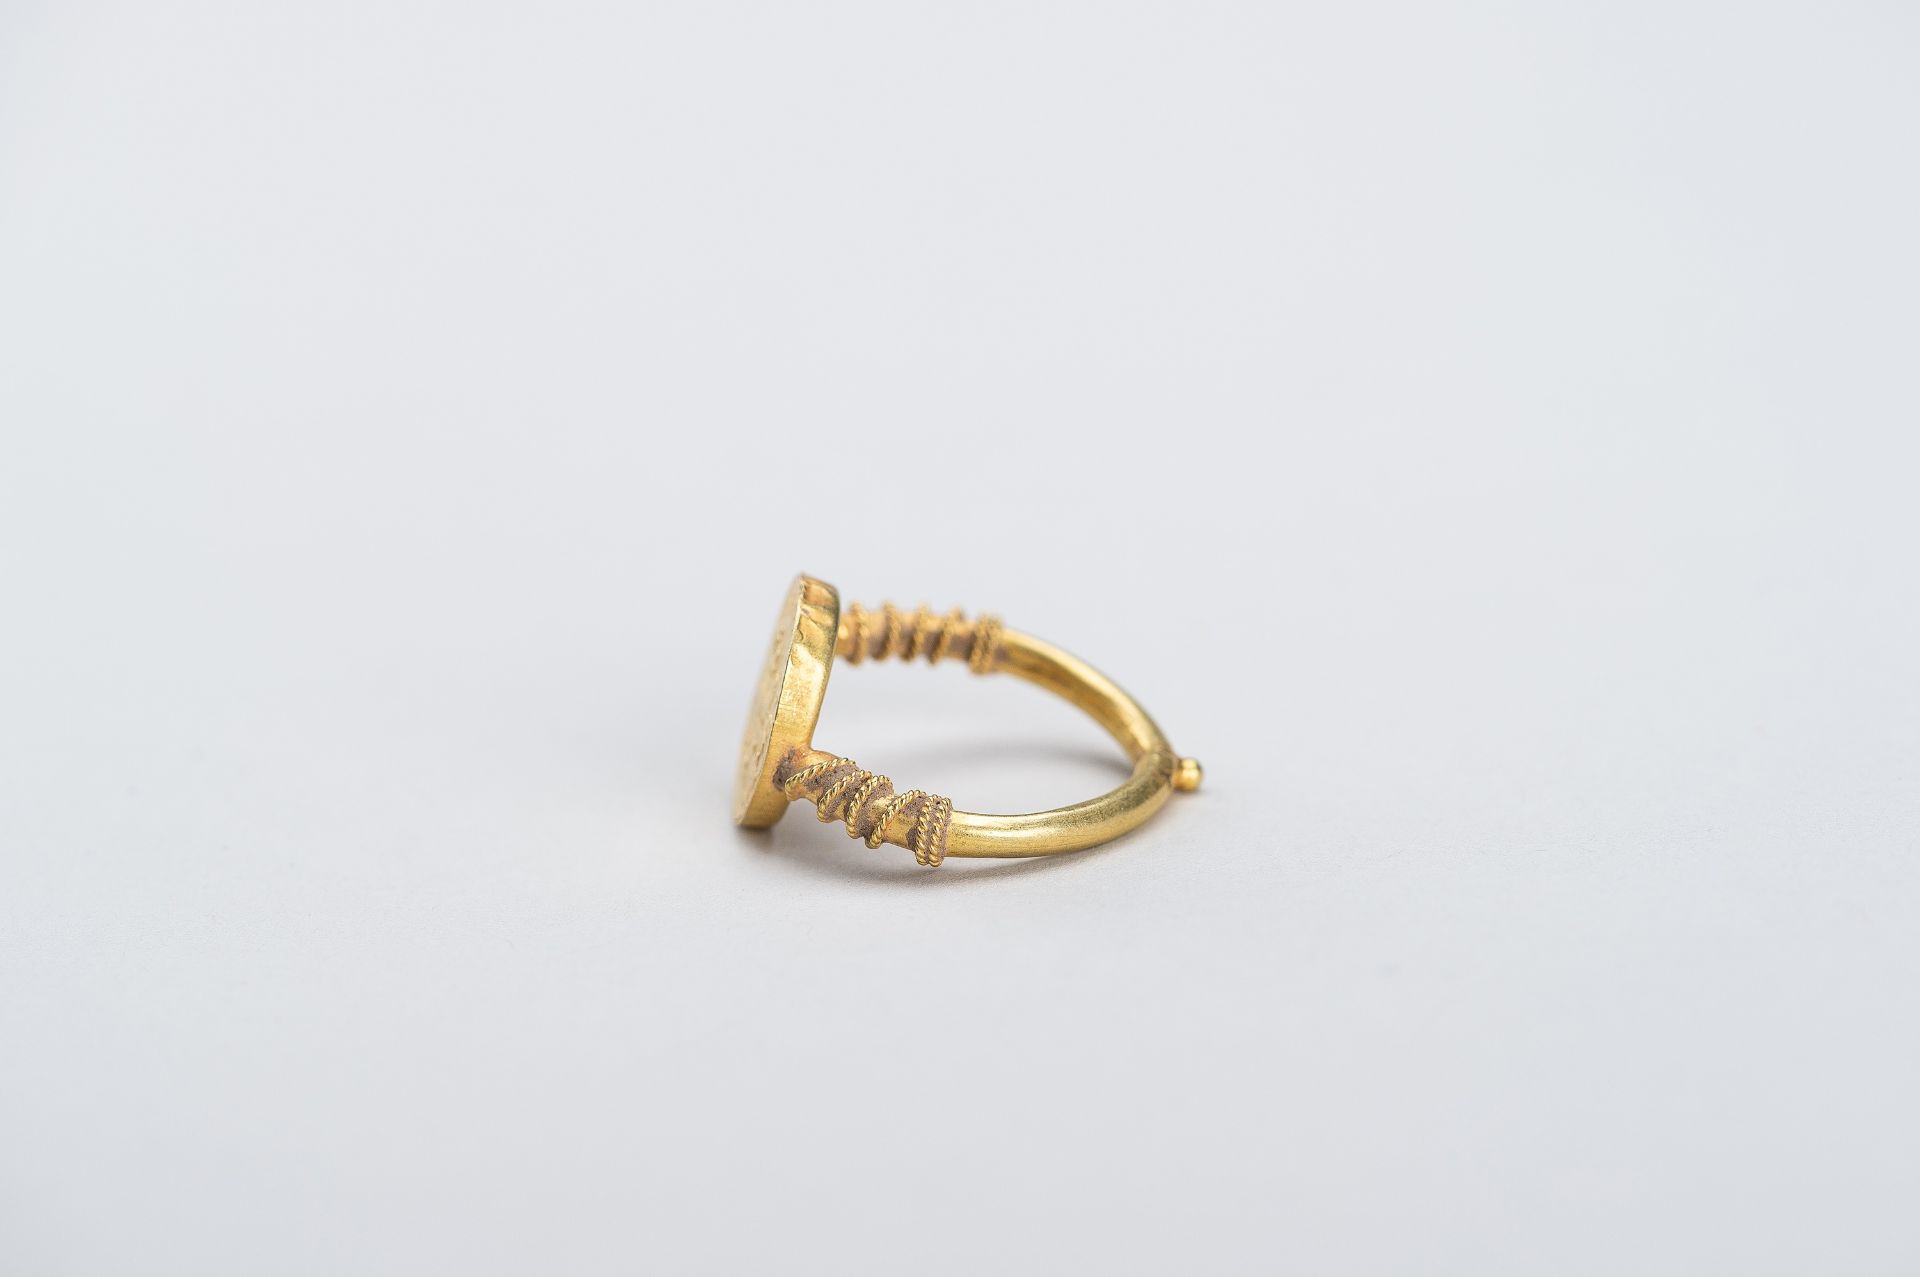 A BACTRIAN GOLD COIN RING - Image 6 of 11